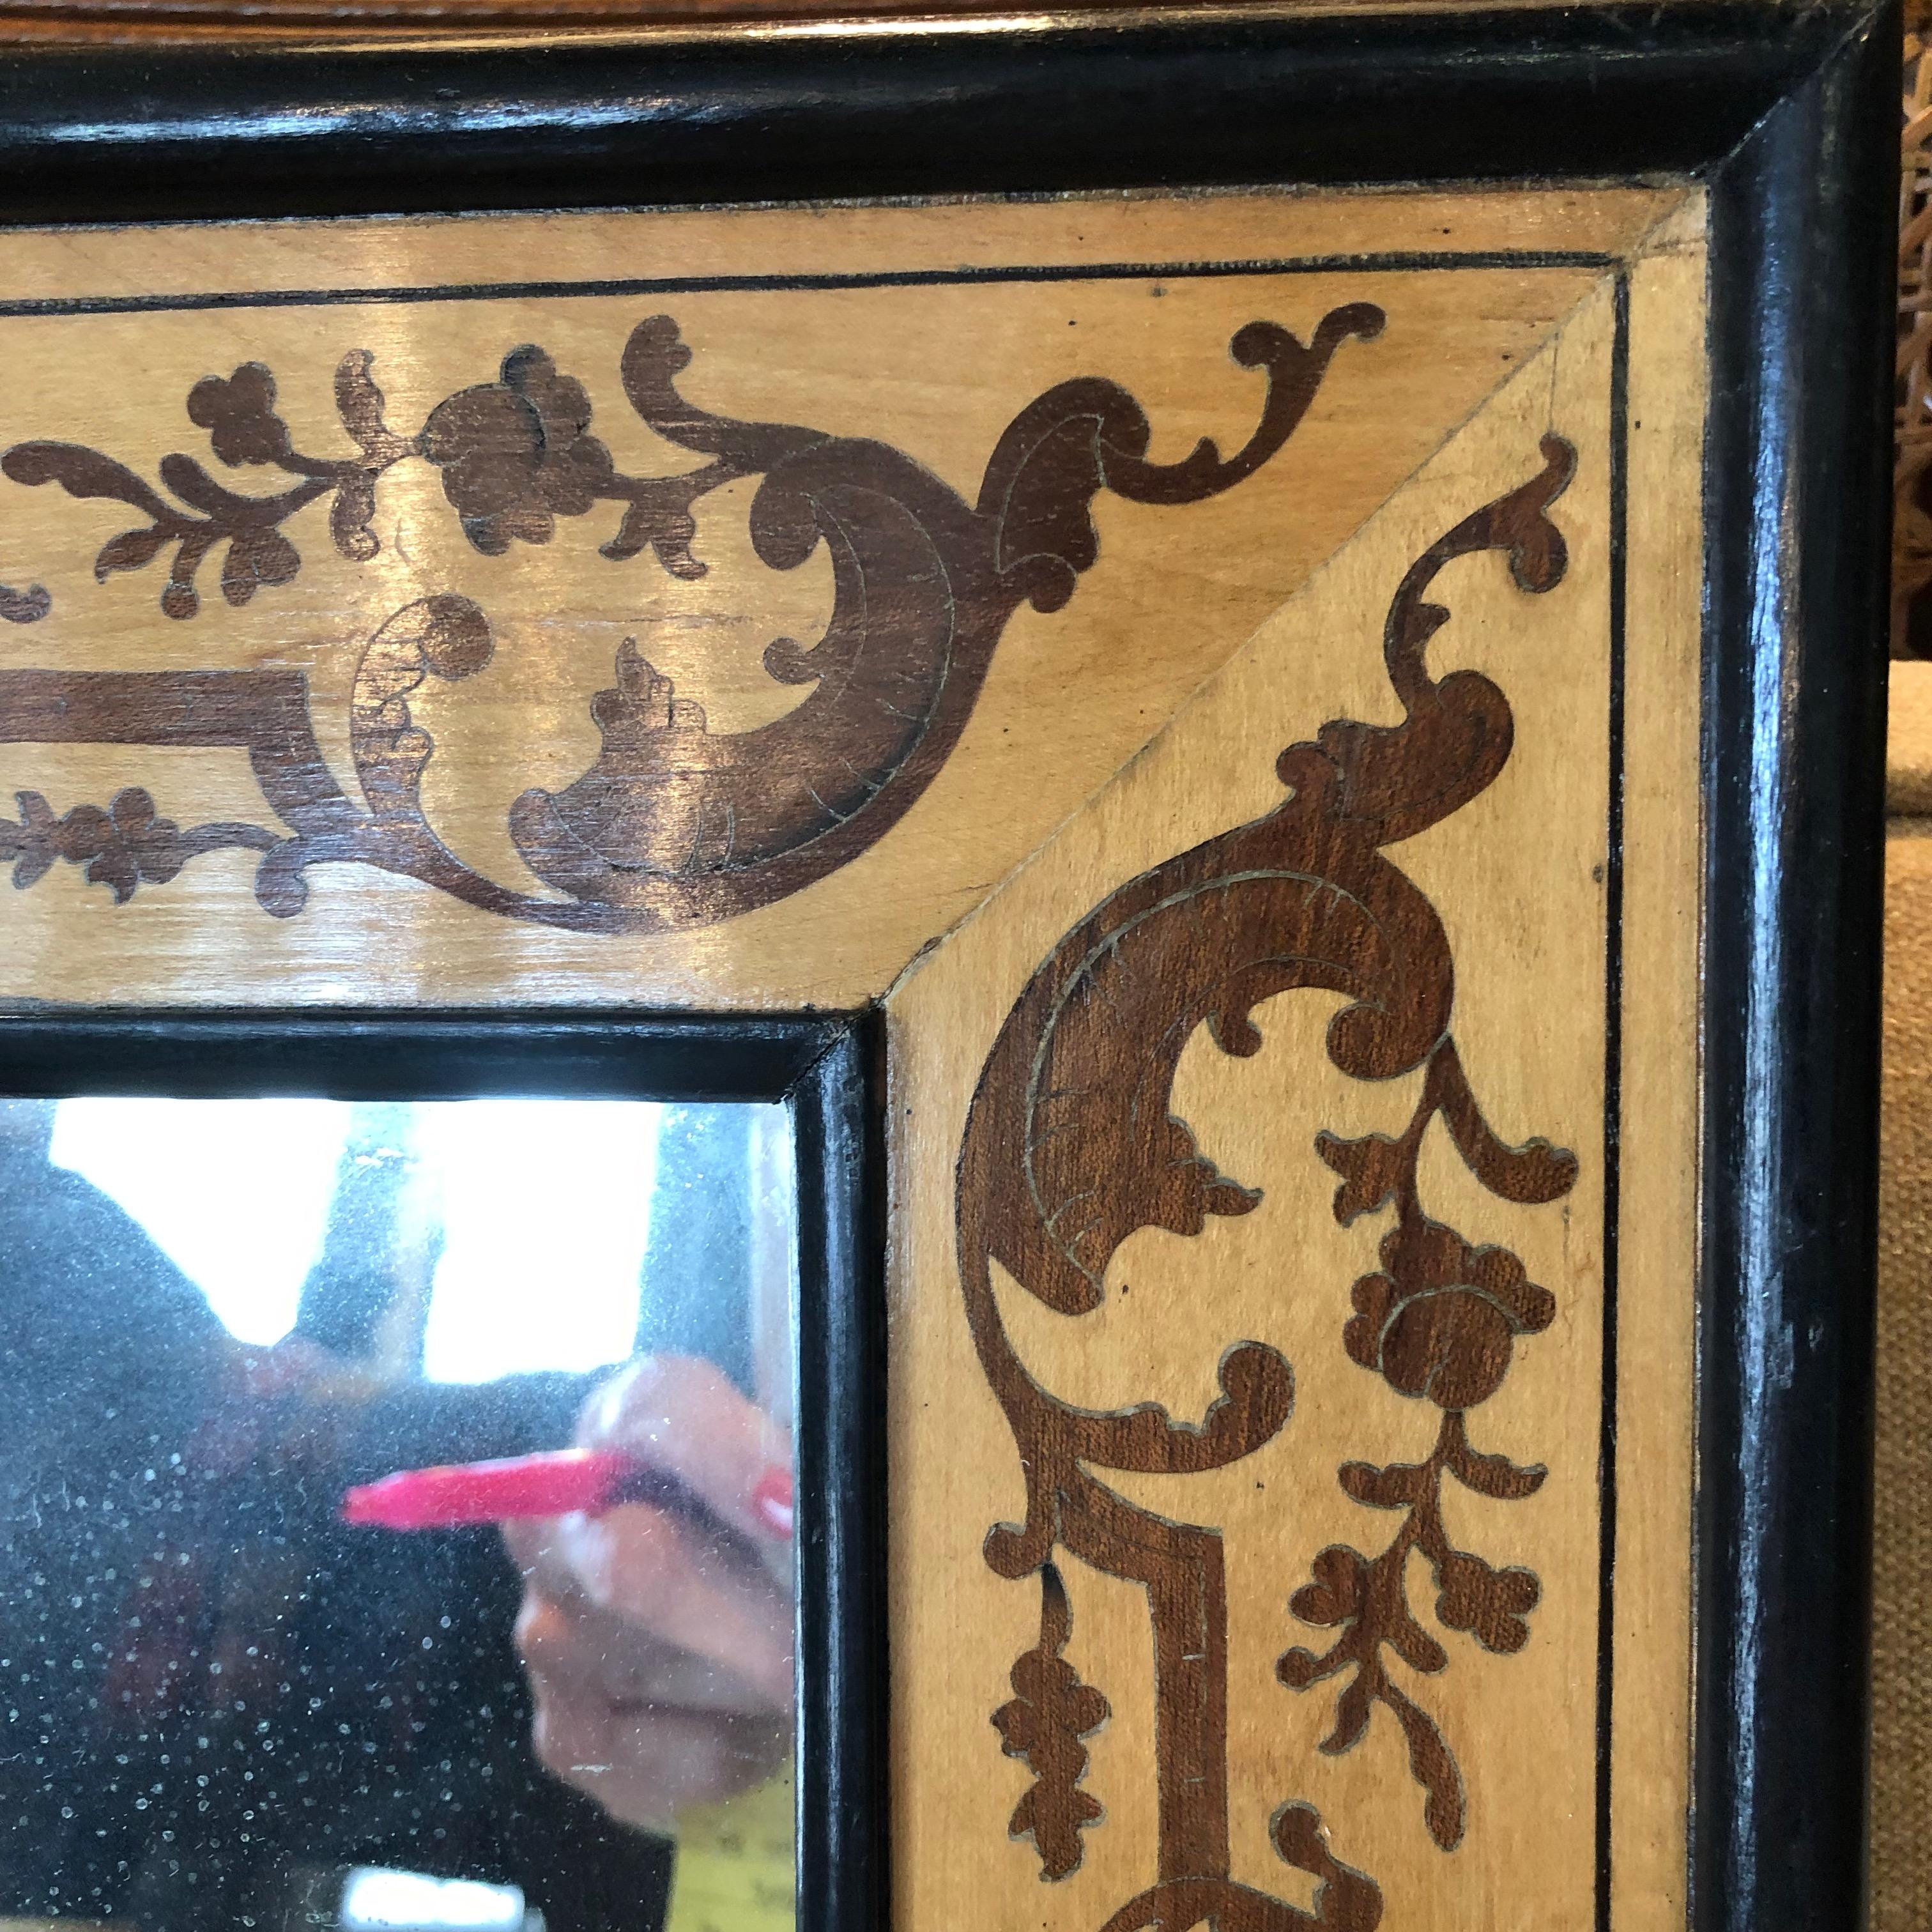 This small mirror with inlaid design is early 1900s handmade.